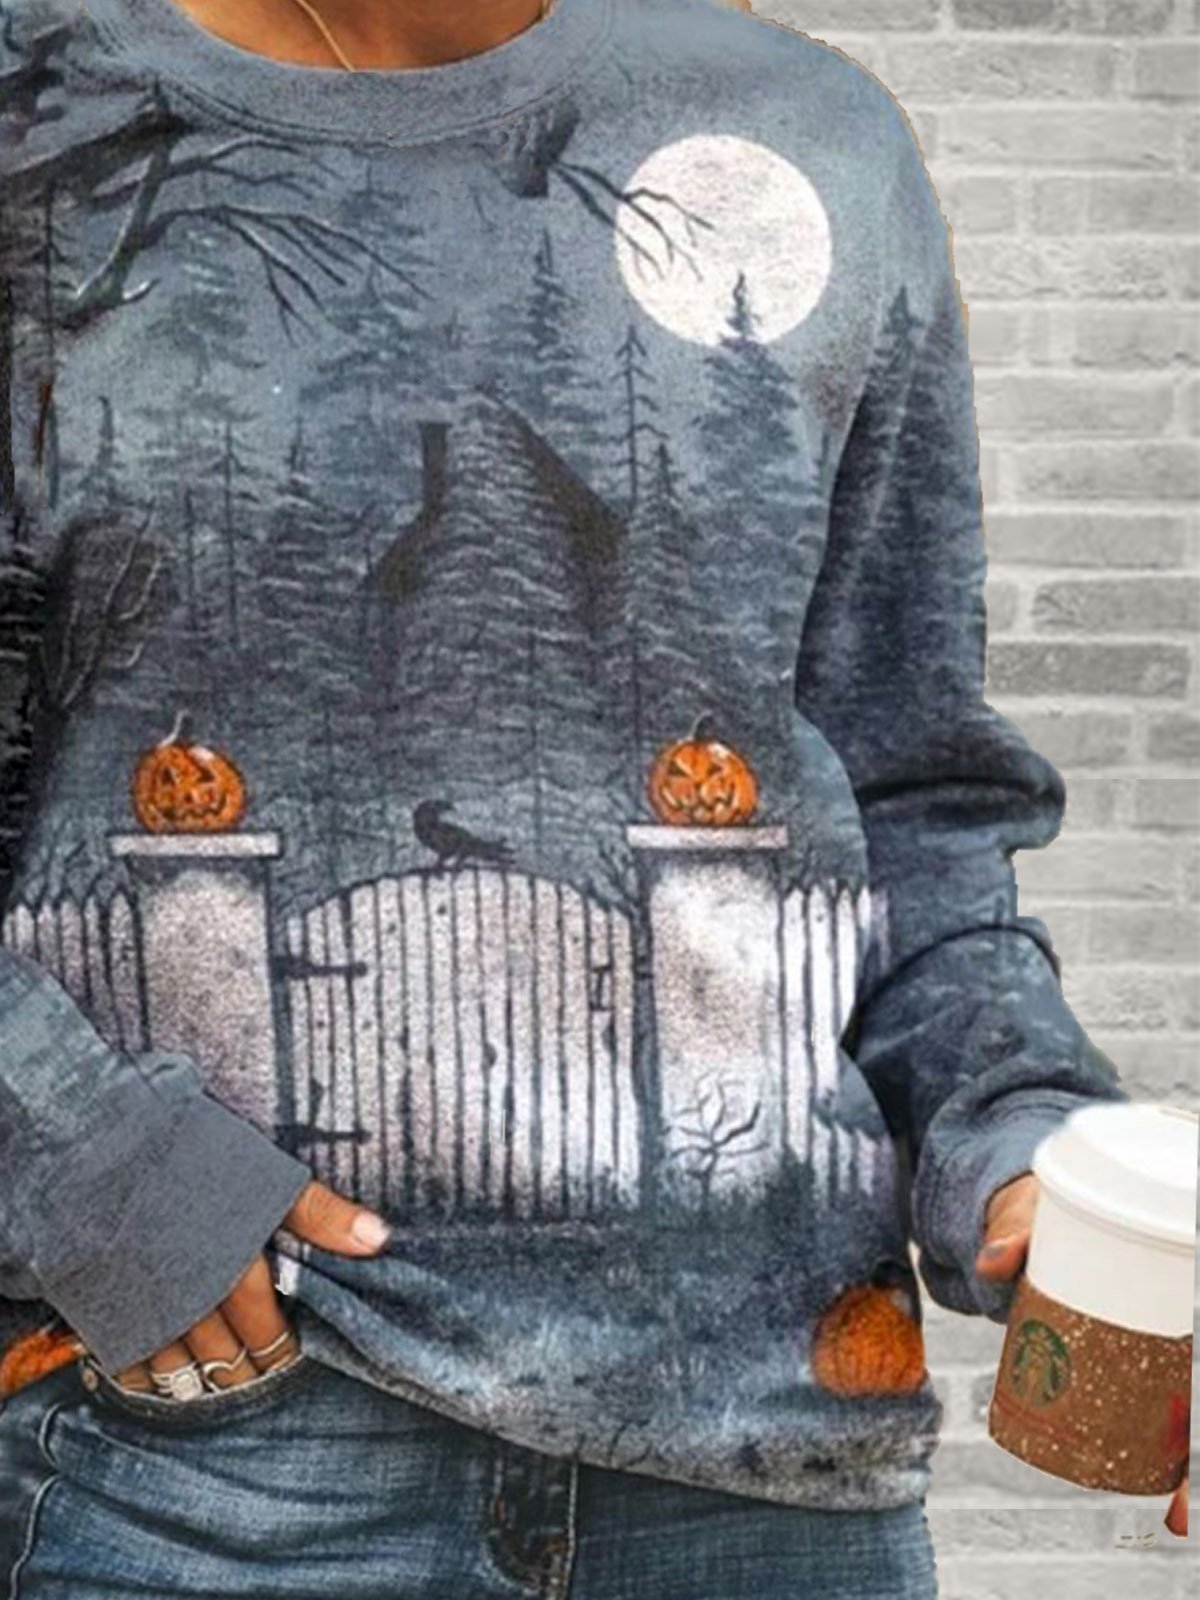 Printed Polyester Cotton Casual Loose Sweatshirt &pullover